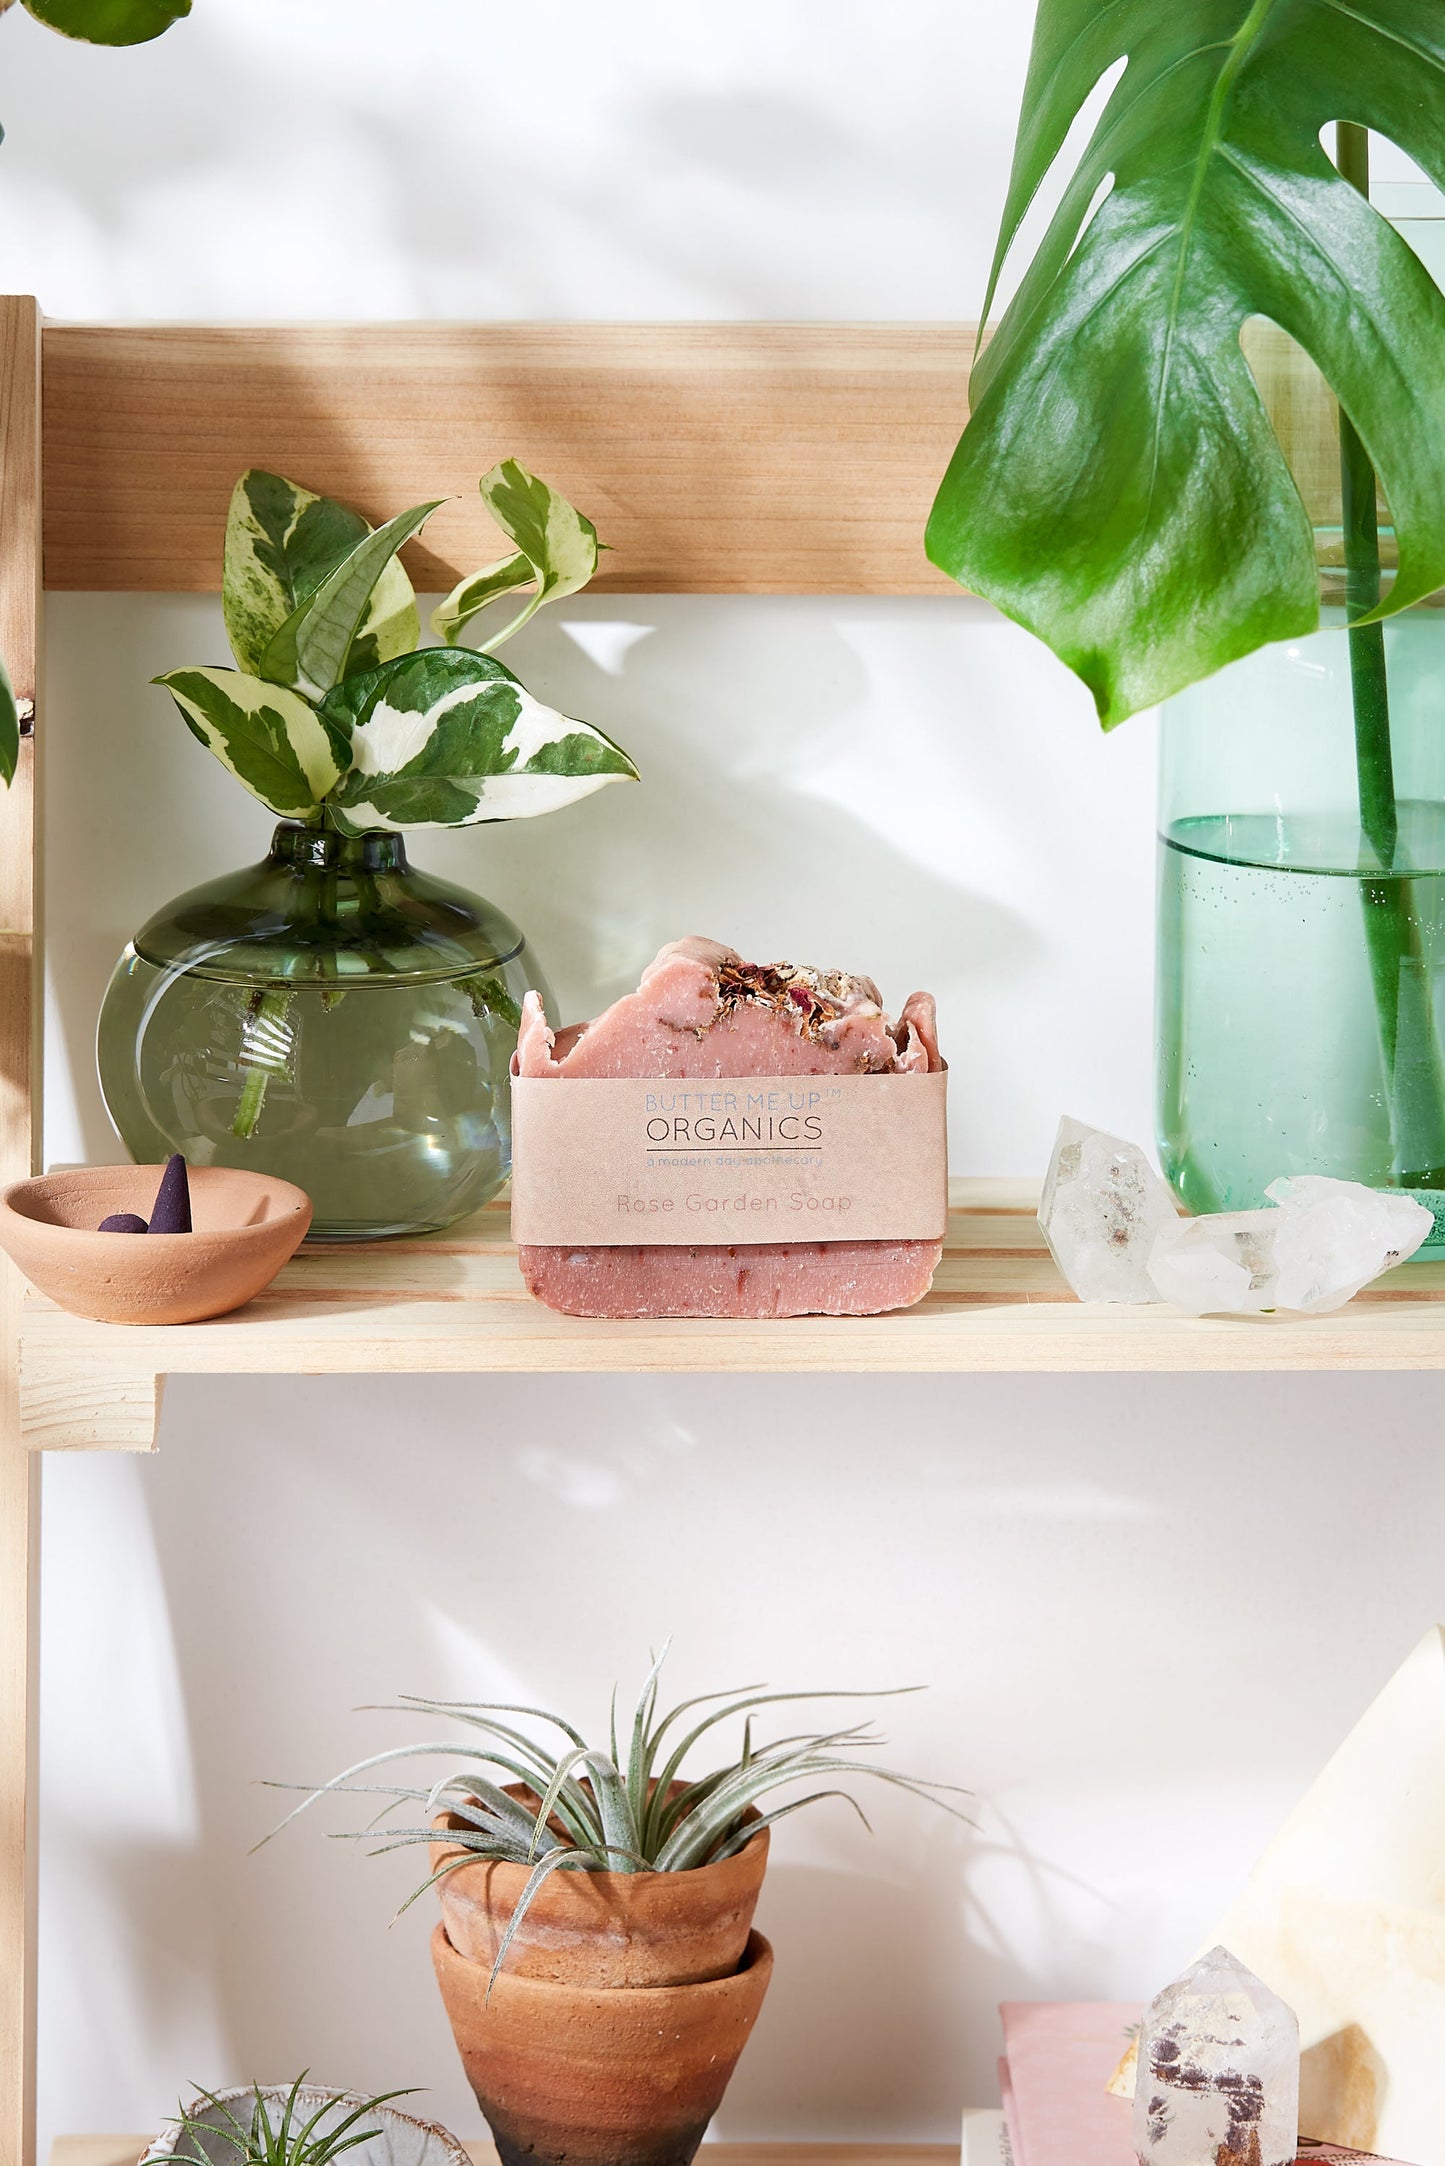 A wooden shelf adorned with natural plants and fragrant soaps, including White Smokey's Rose Garden Organic Soap, Vegan Soap, and Palm Free.